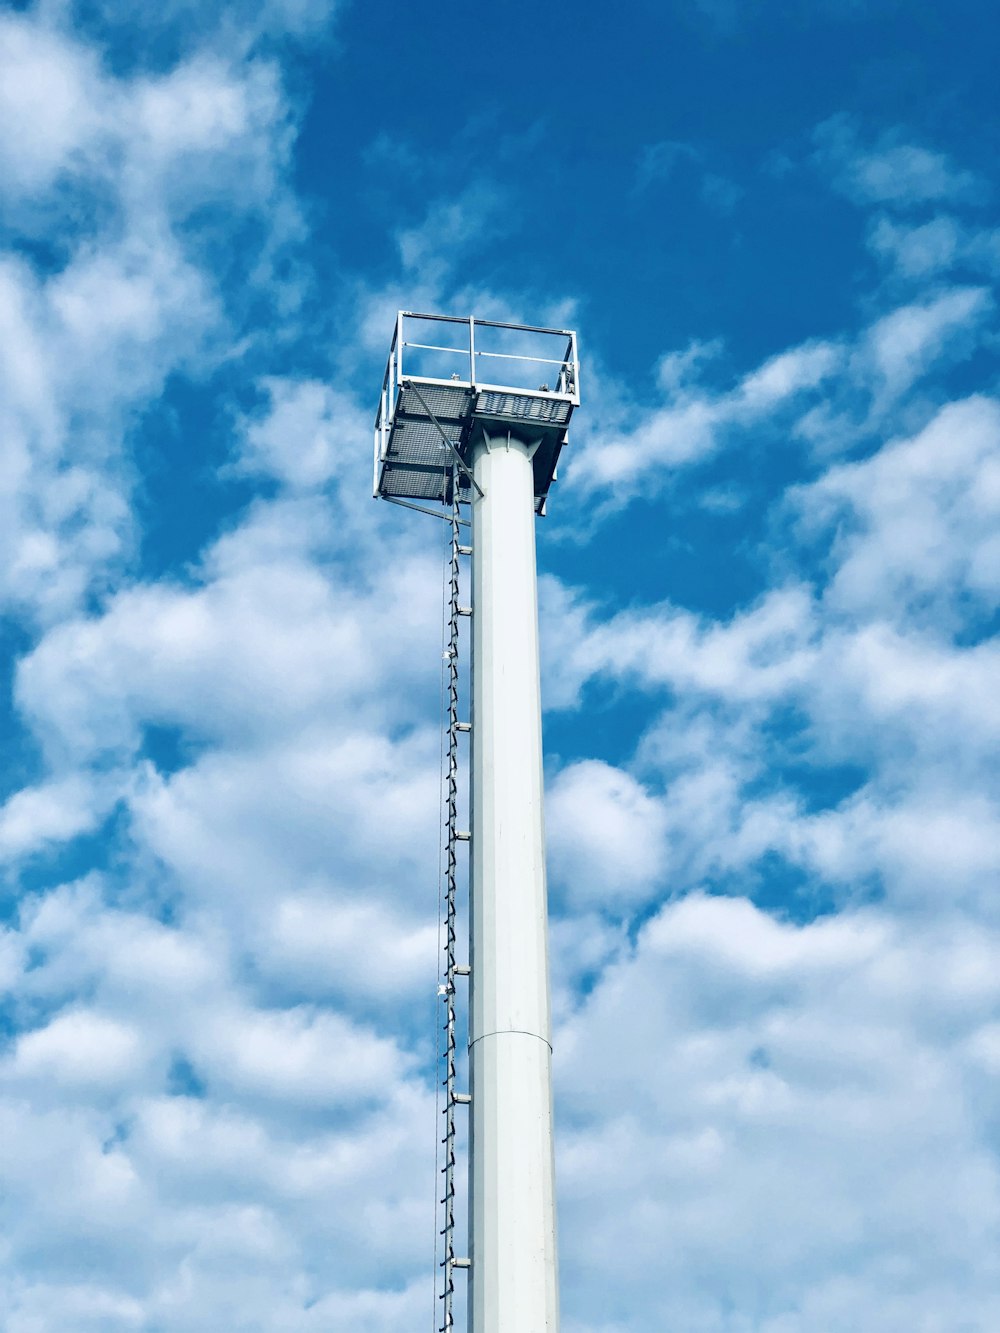 white concrete tower under blue sky and white clouds during daytime